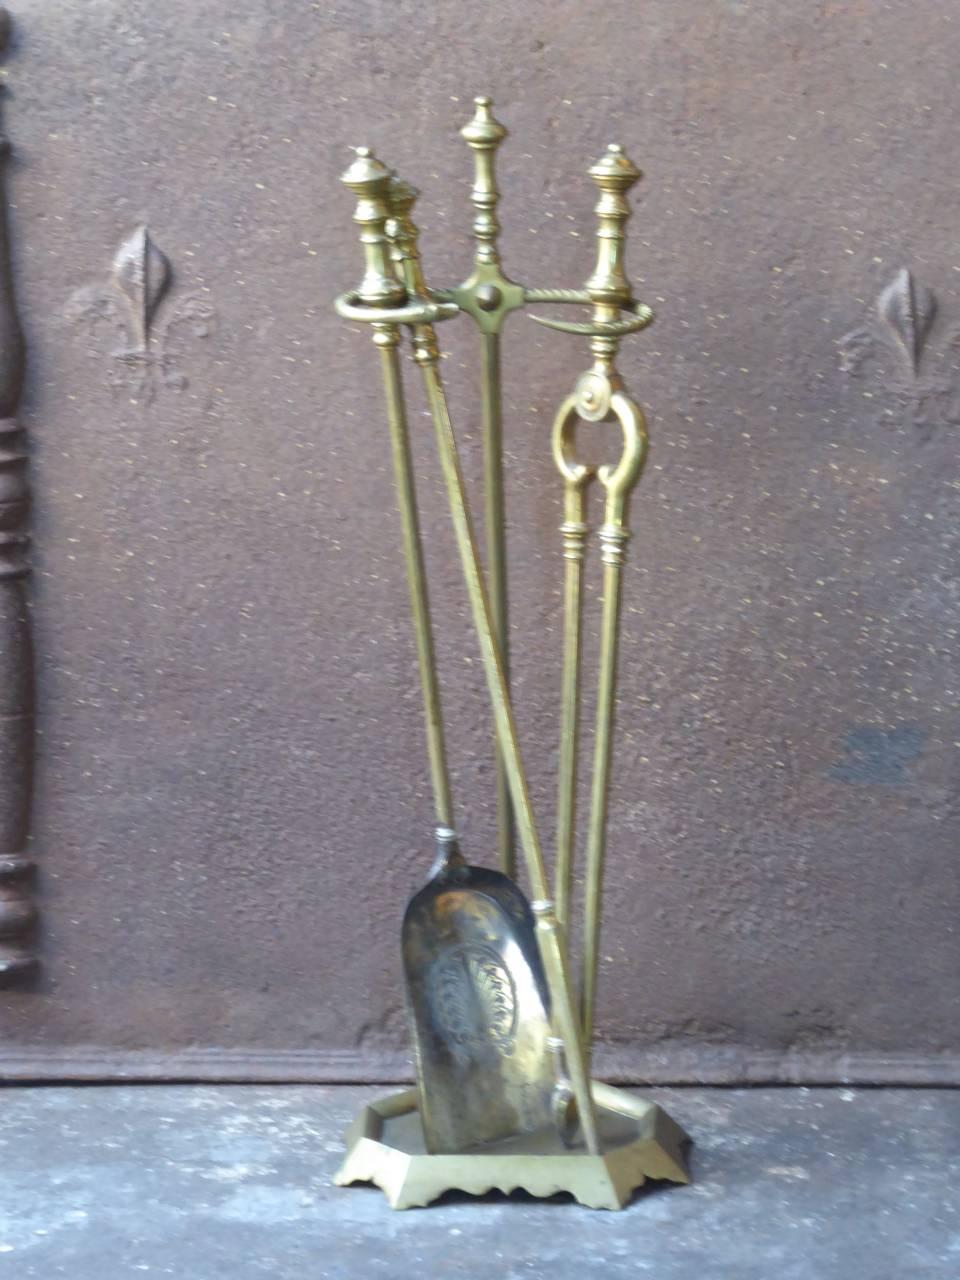 19th-early 20th century English Victorian fireplace toolset - fire irons made of brass.

We have a unique and specialized collection of antique and used fireplace accessories consisting of more than 1000 listings at 1stdibs. Amongst others we always